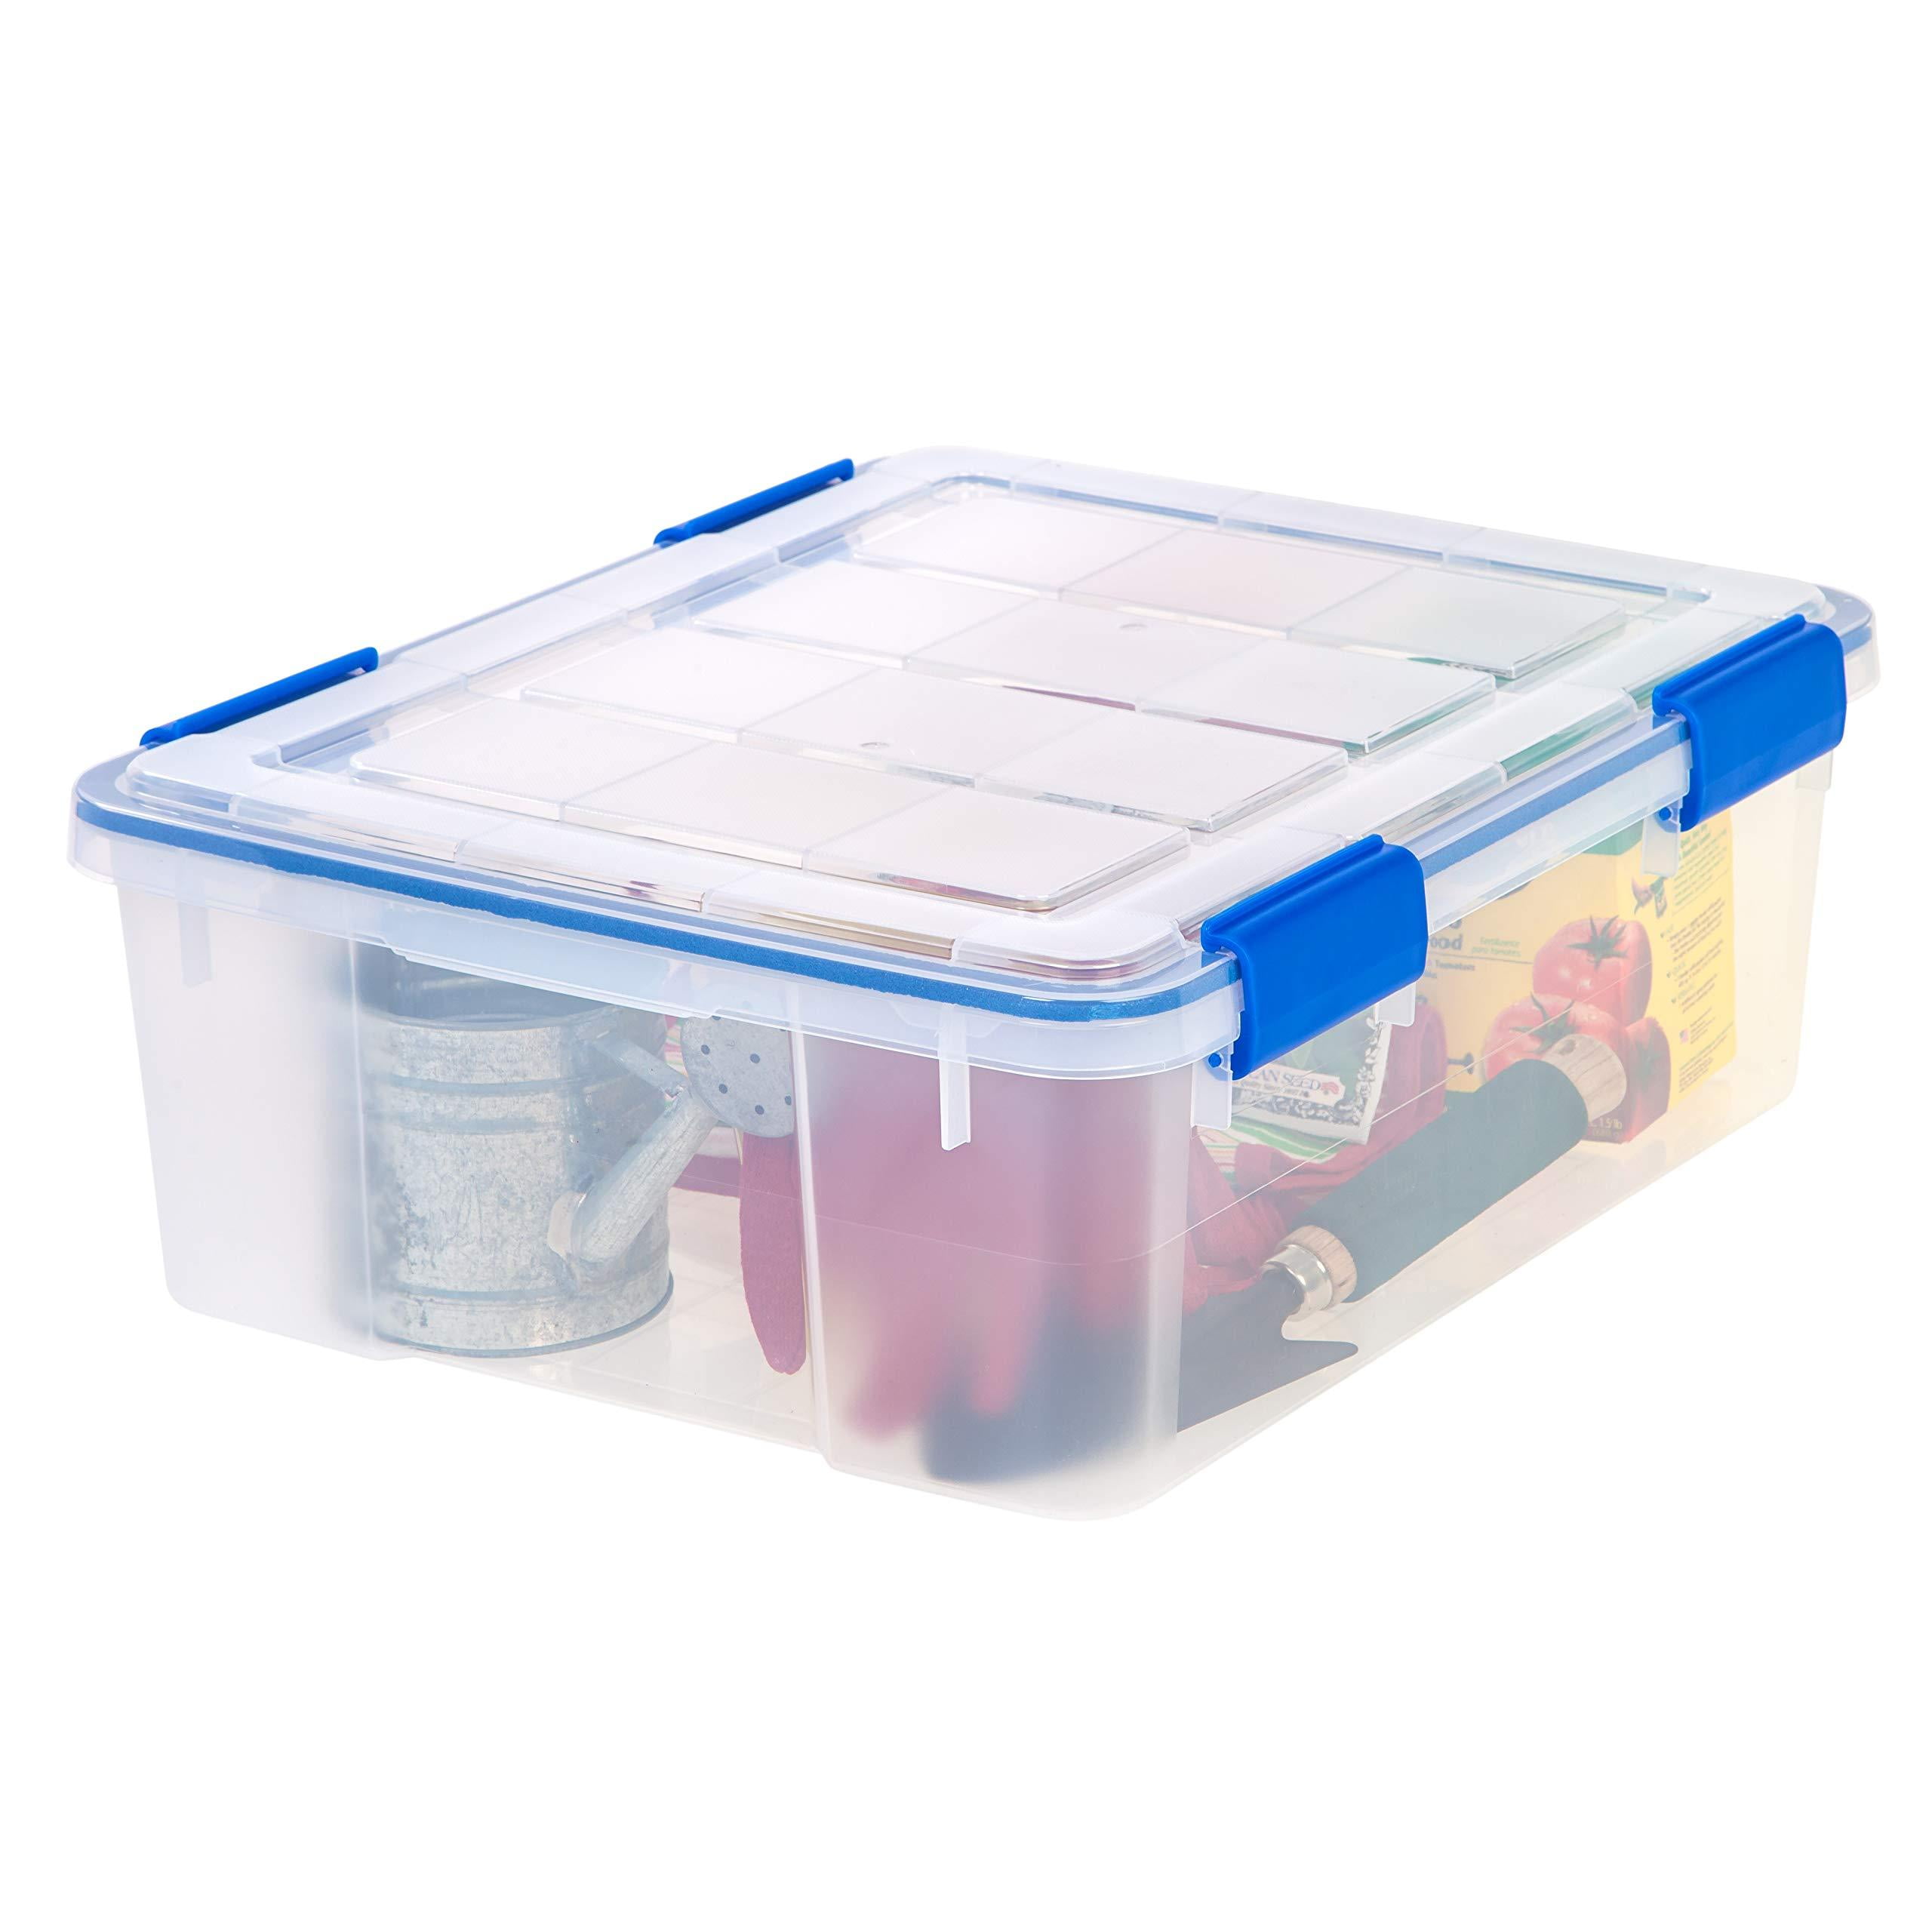 3pcs 85L Waterproof Garage Outdoor Storage Containers, Durable Waterproof  Big Plastic Bins with Sealing Lids for Kitchen Food Shoes Toys Craft Under  Bed Organizers, Transparent 27.75x18.89x15.16inch 